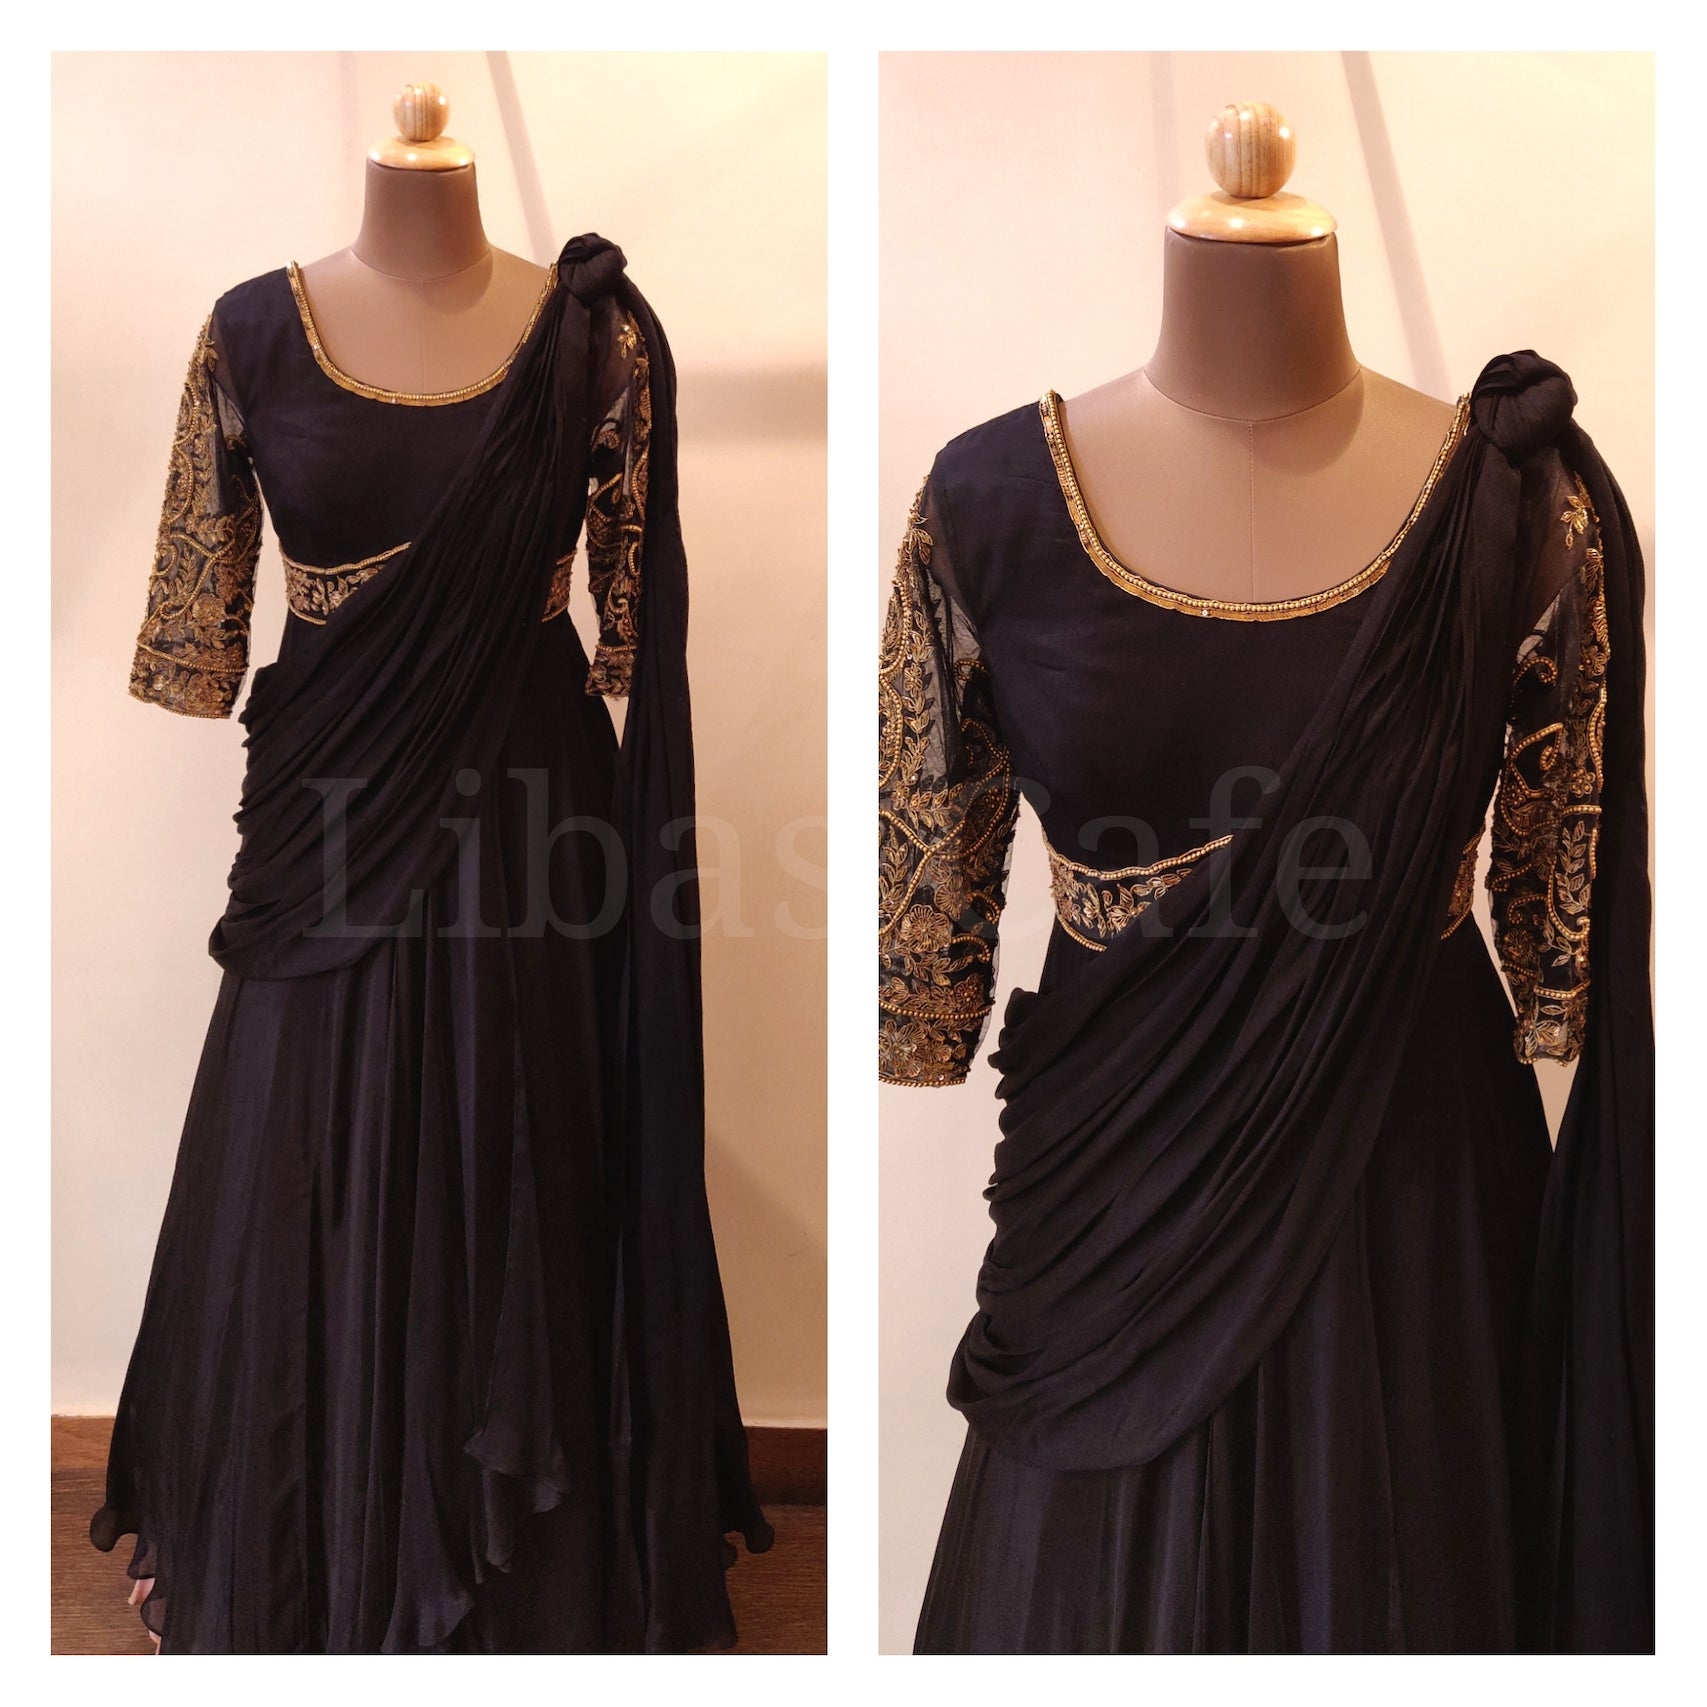 Black Drape Gown With Embroidered Belt And Sleeves